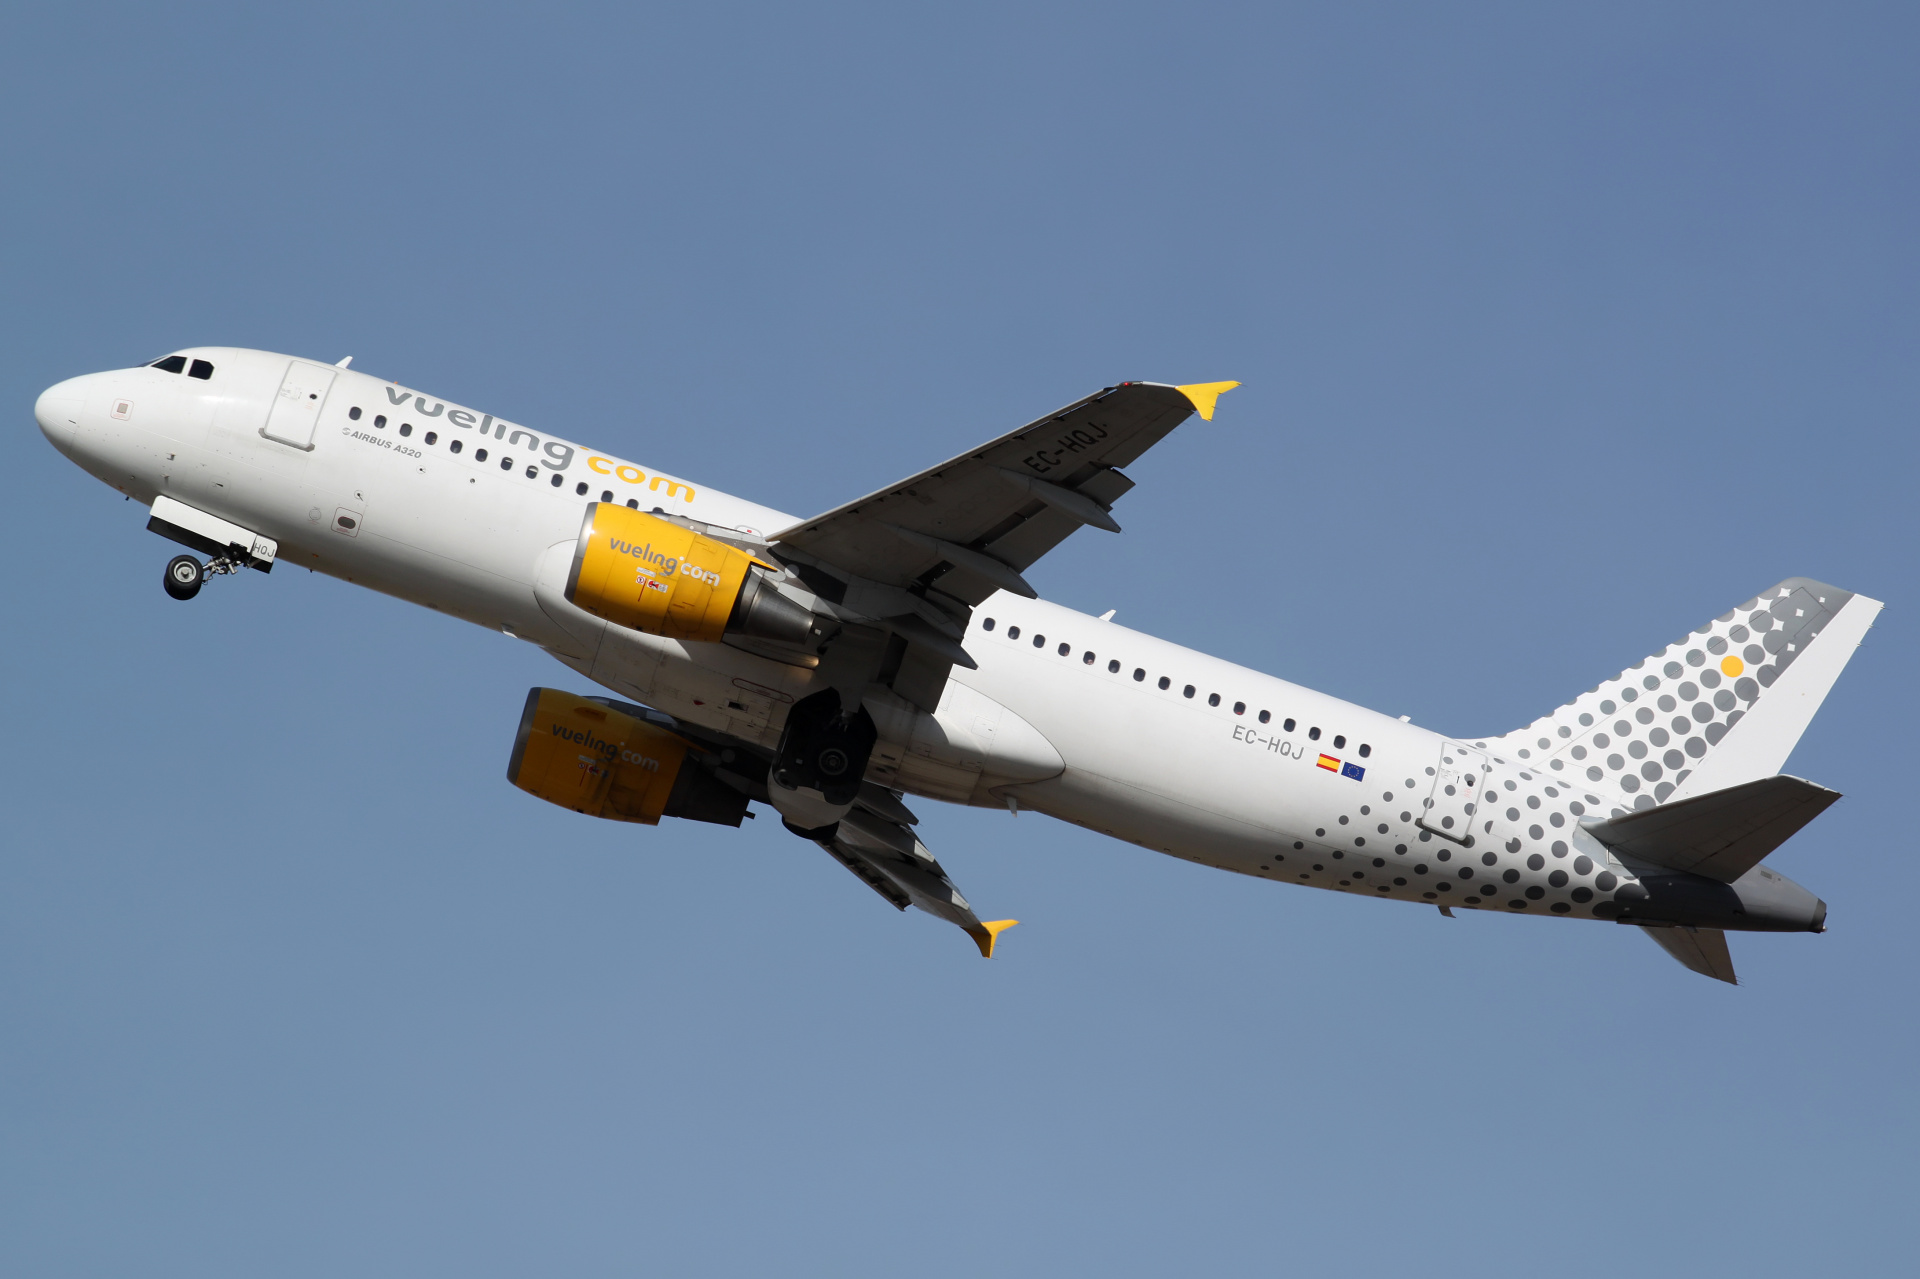 EC-HQJ (Aircraft » EPWA Spotting » Airbus A320-200 » Vueling Airlines)